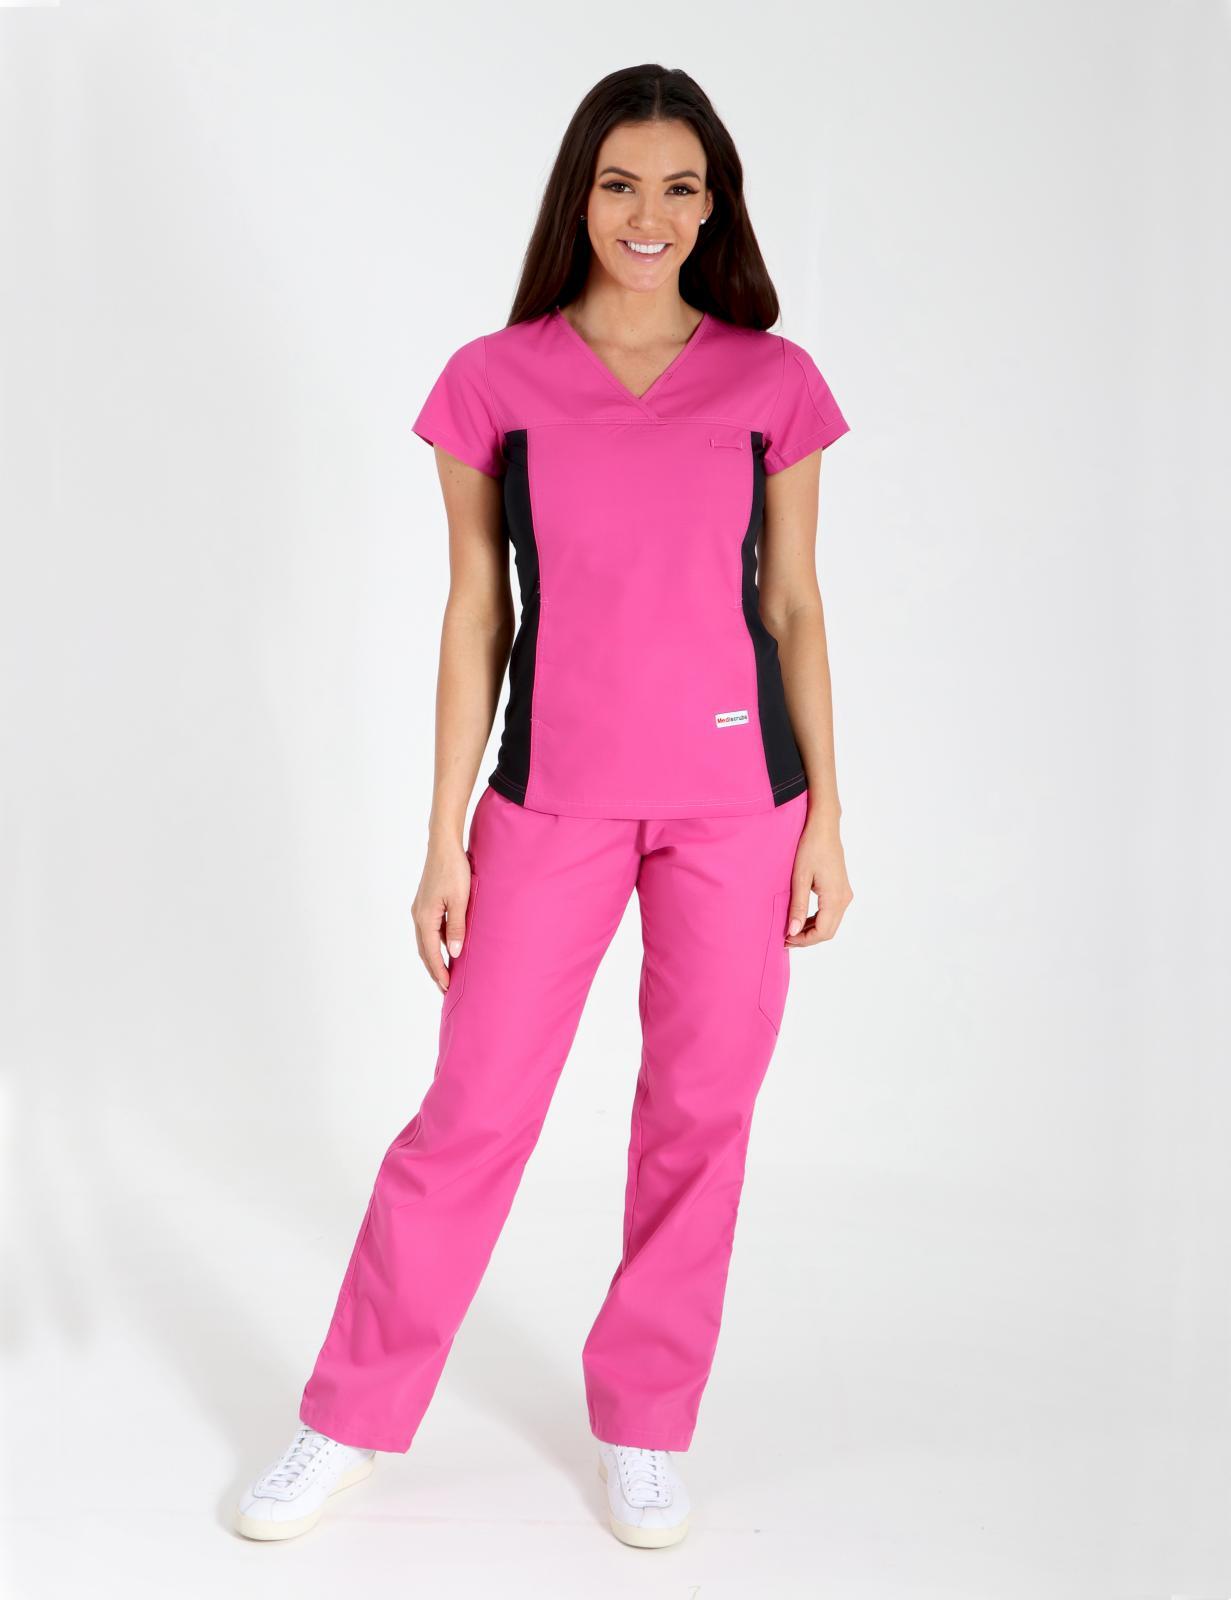 Women's Fit Solid Scrub Top With Spandex Panel - Pink - 4X large - 0